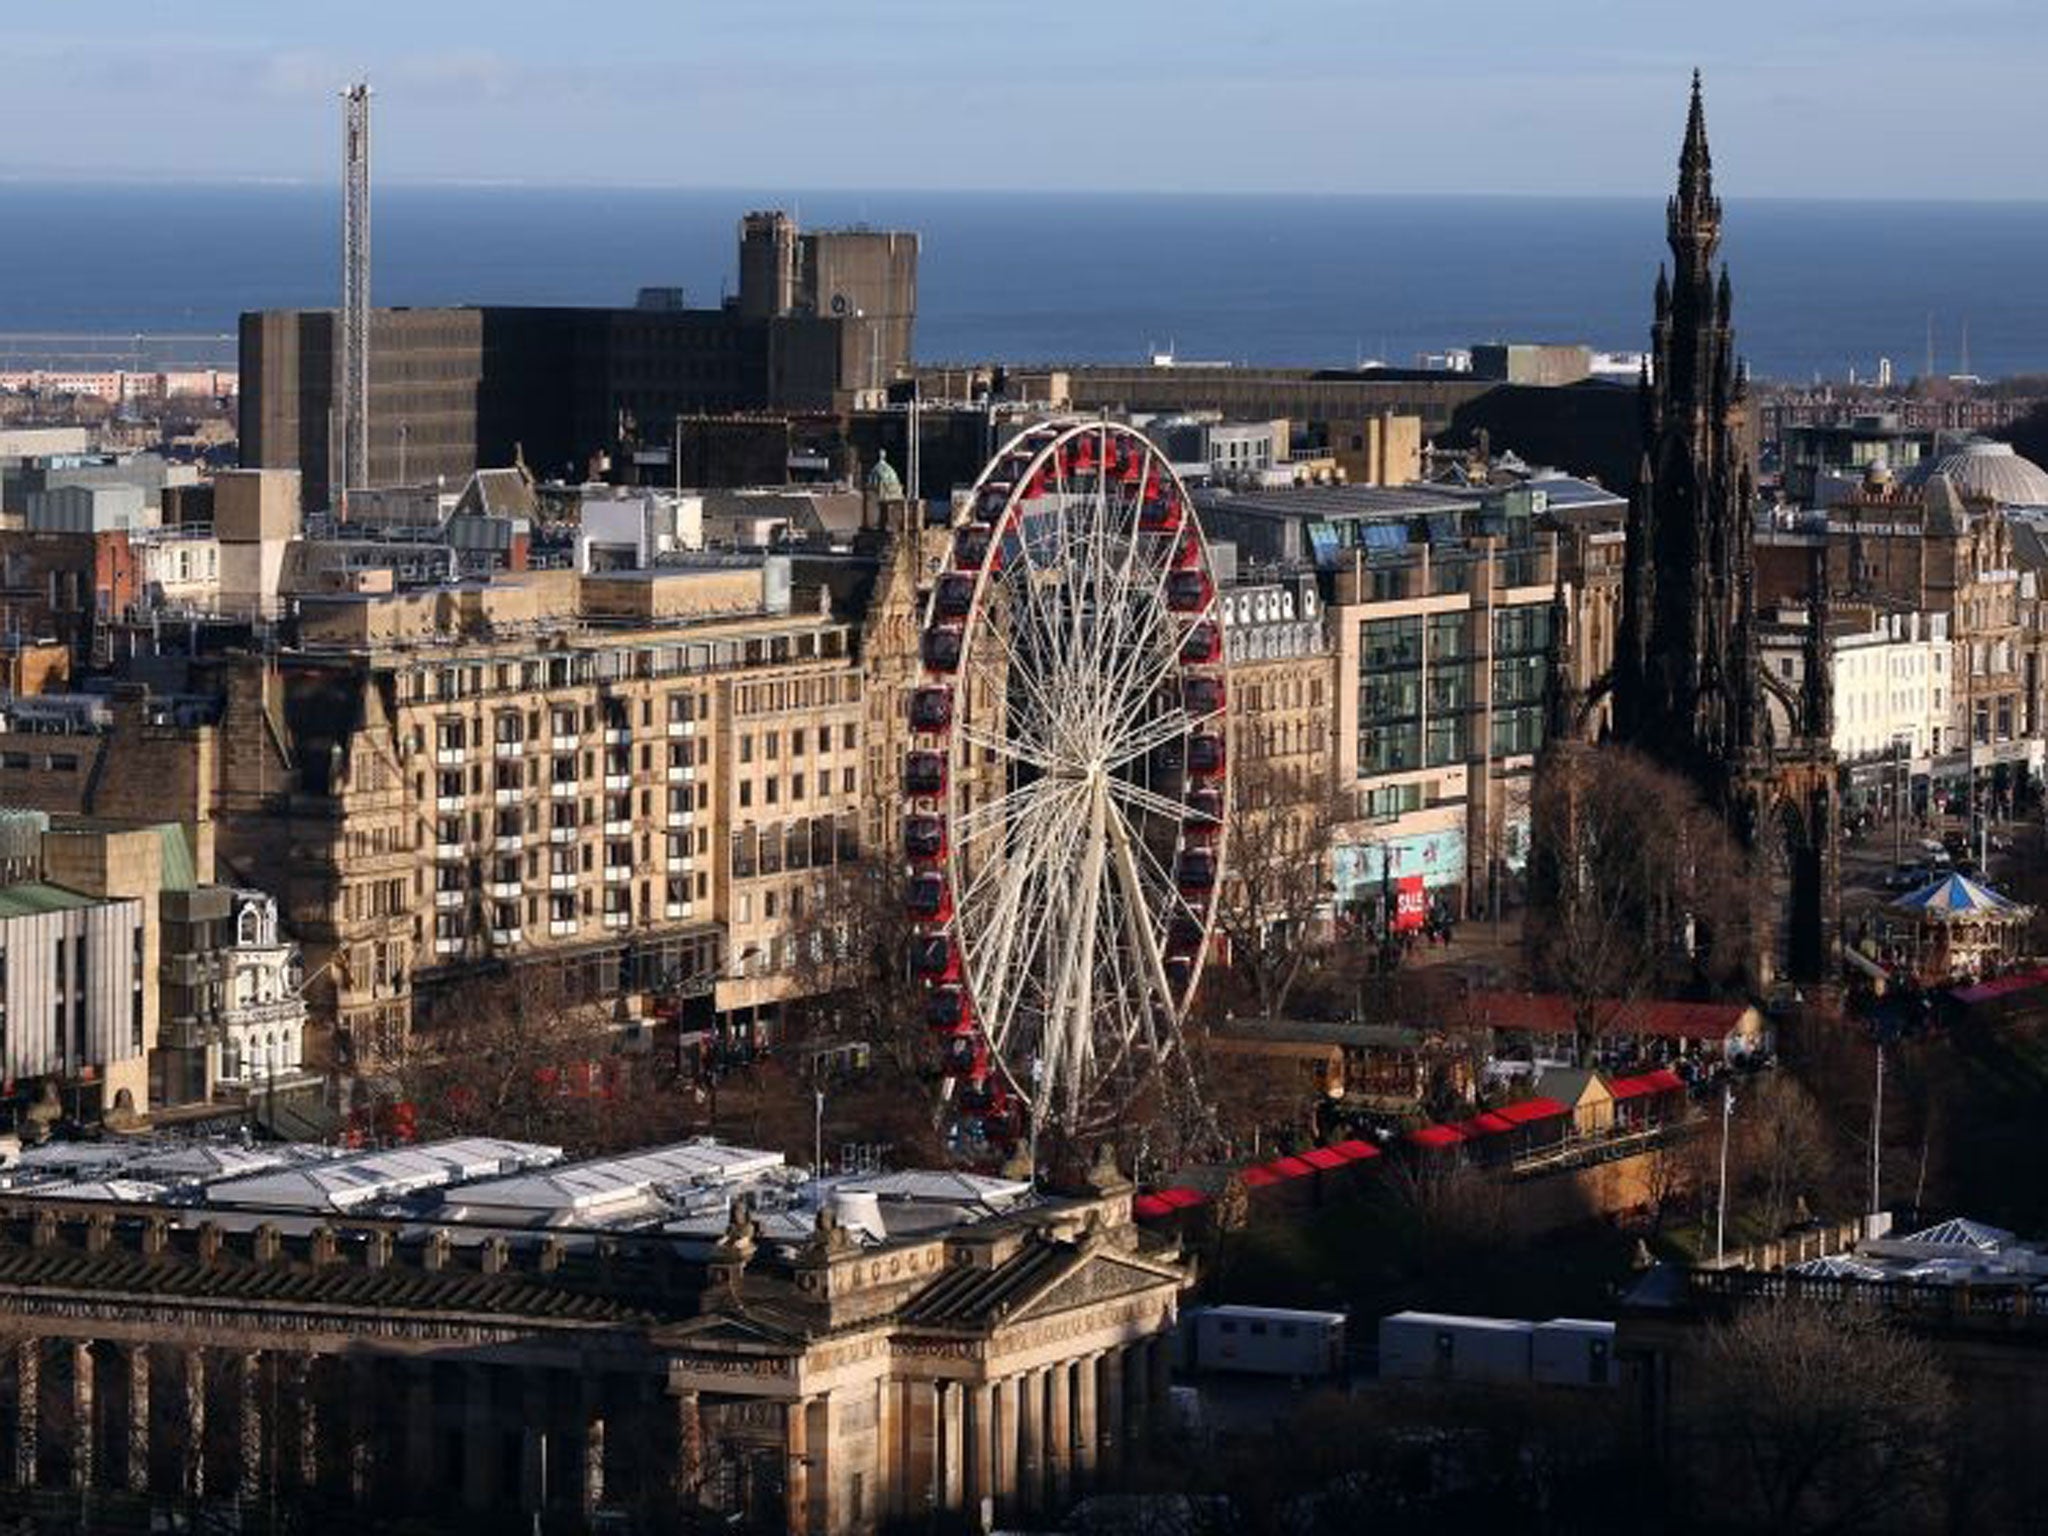 Efficient transport links were cited as one of the reasons why Edinburgh might be the best location for budding entrepreneurs